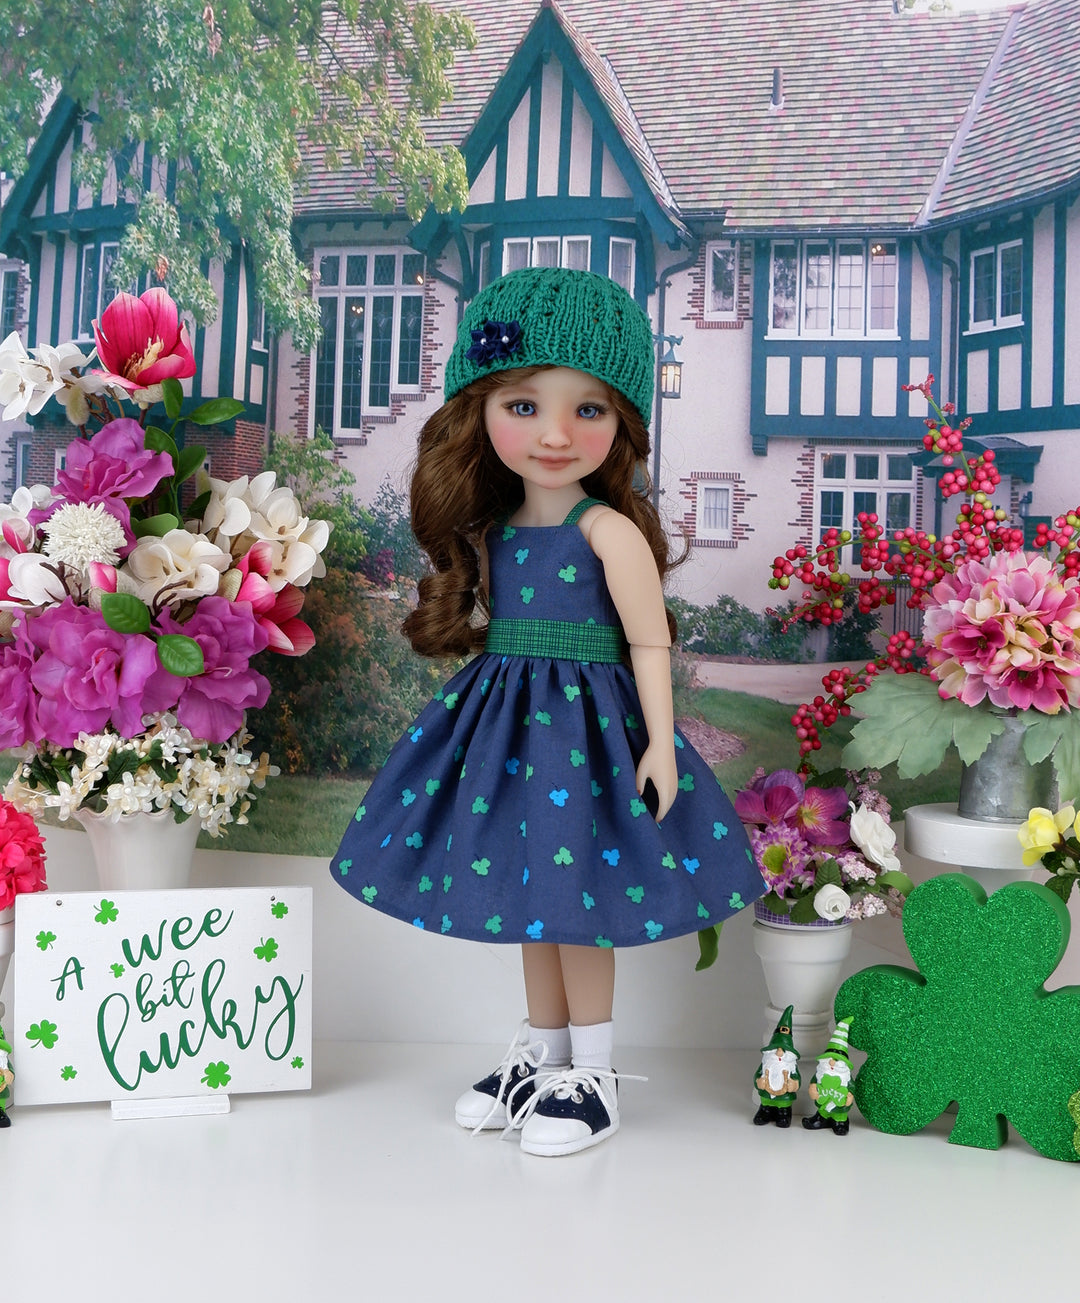 Wee Clover - dress and sweater set with shoes for Ruby Red Fashion Friends doll